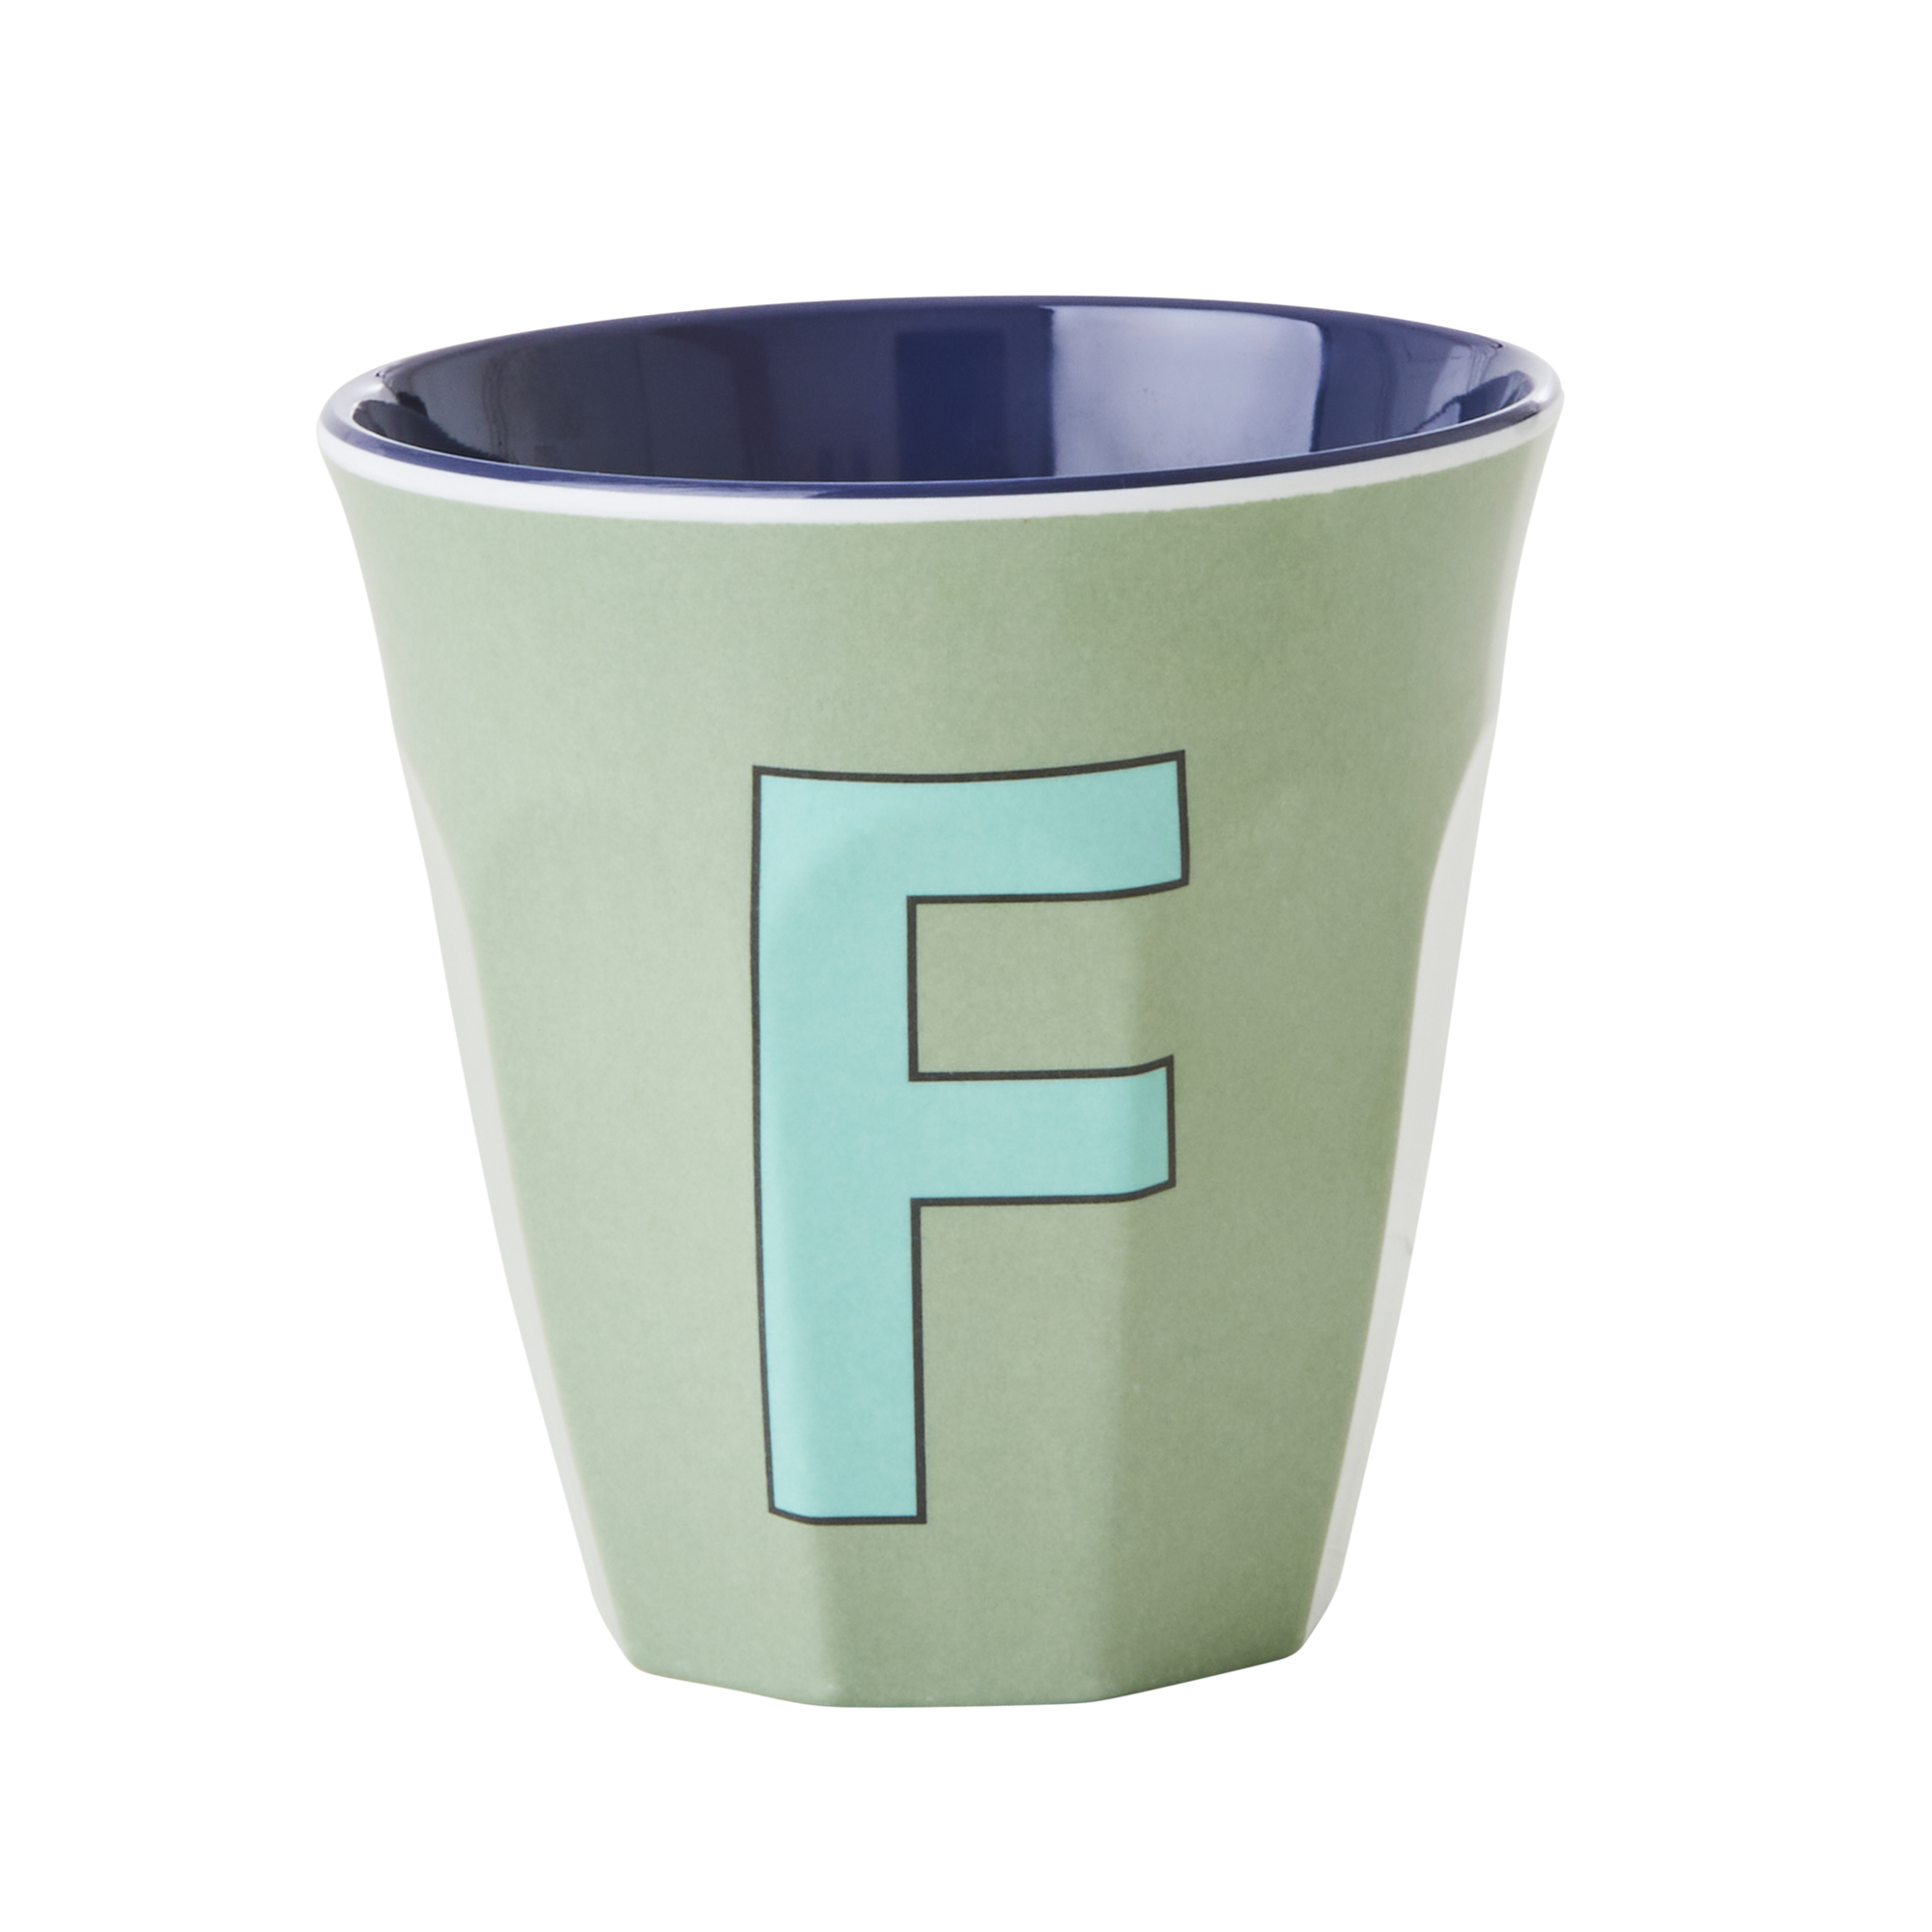 Melamine cup by Rice by Rice in the colors mint, aqua, and blue with the letter "F"